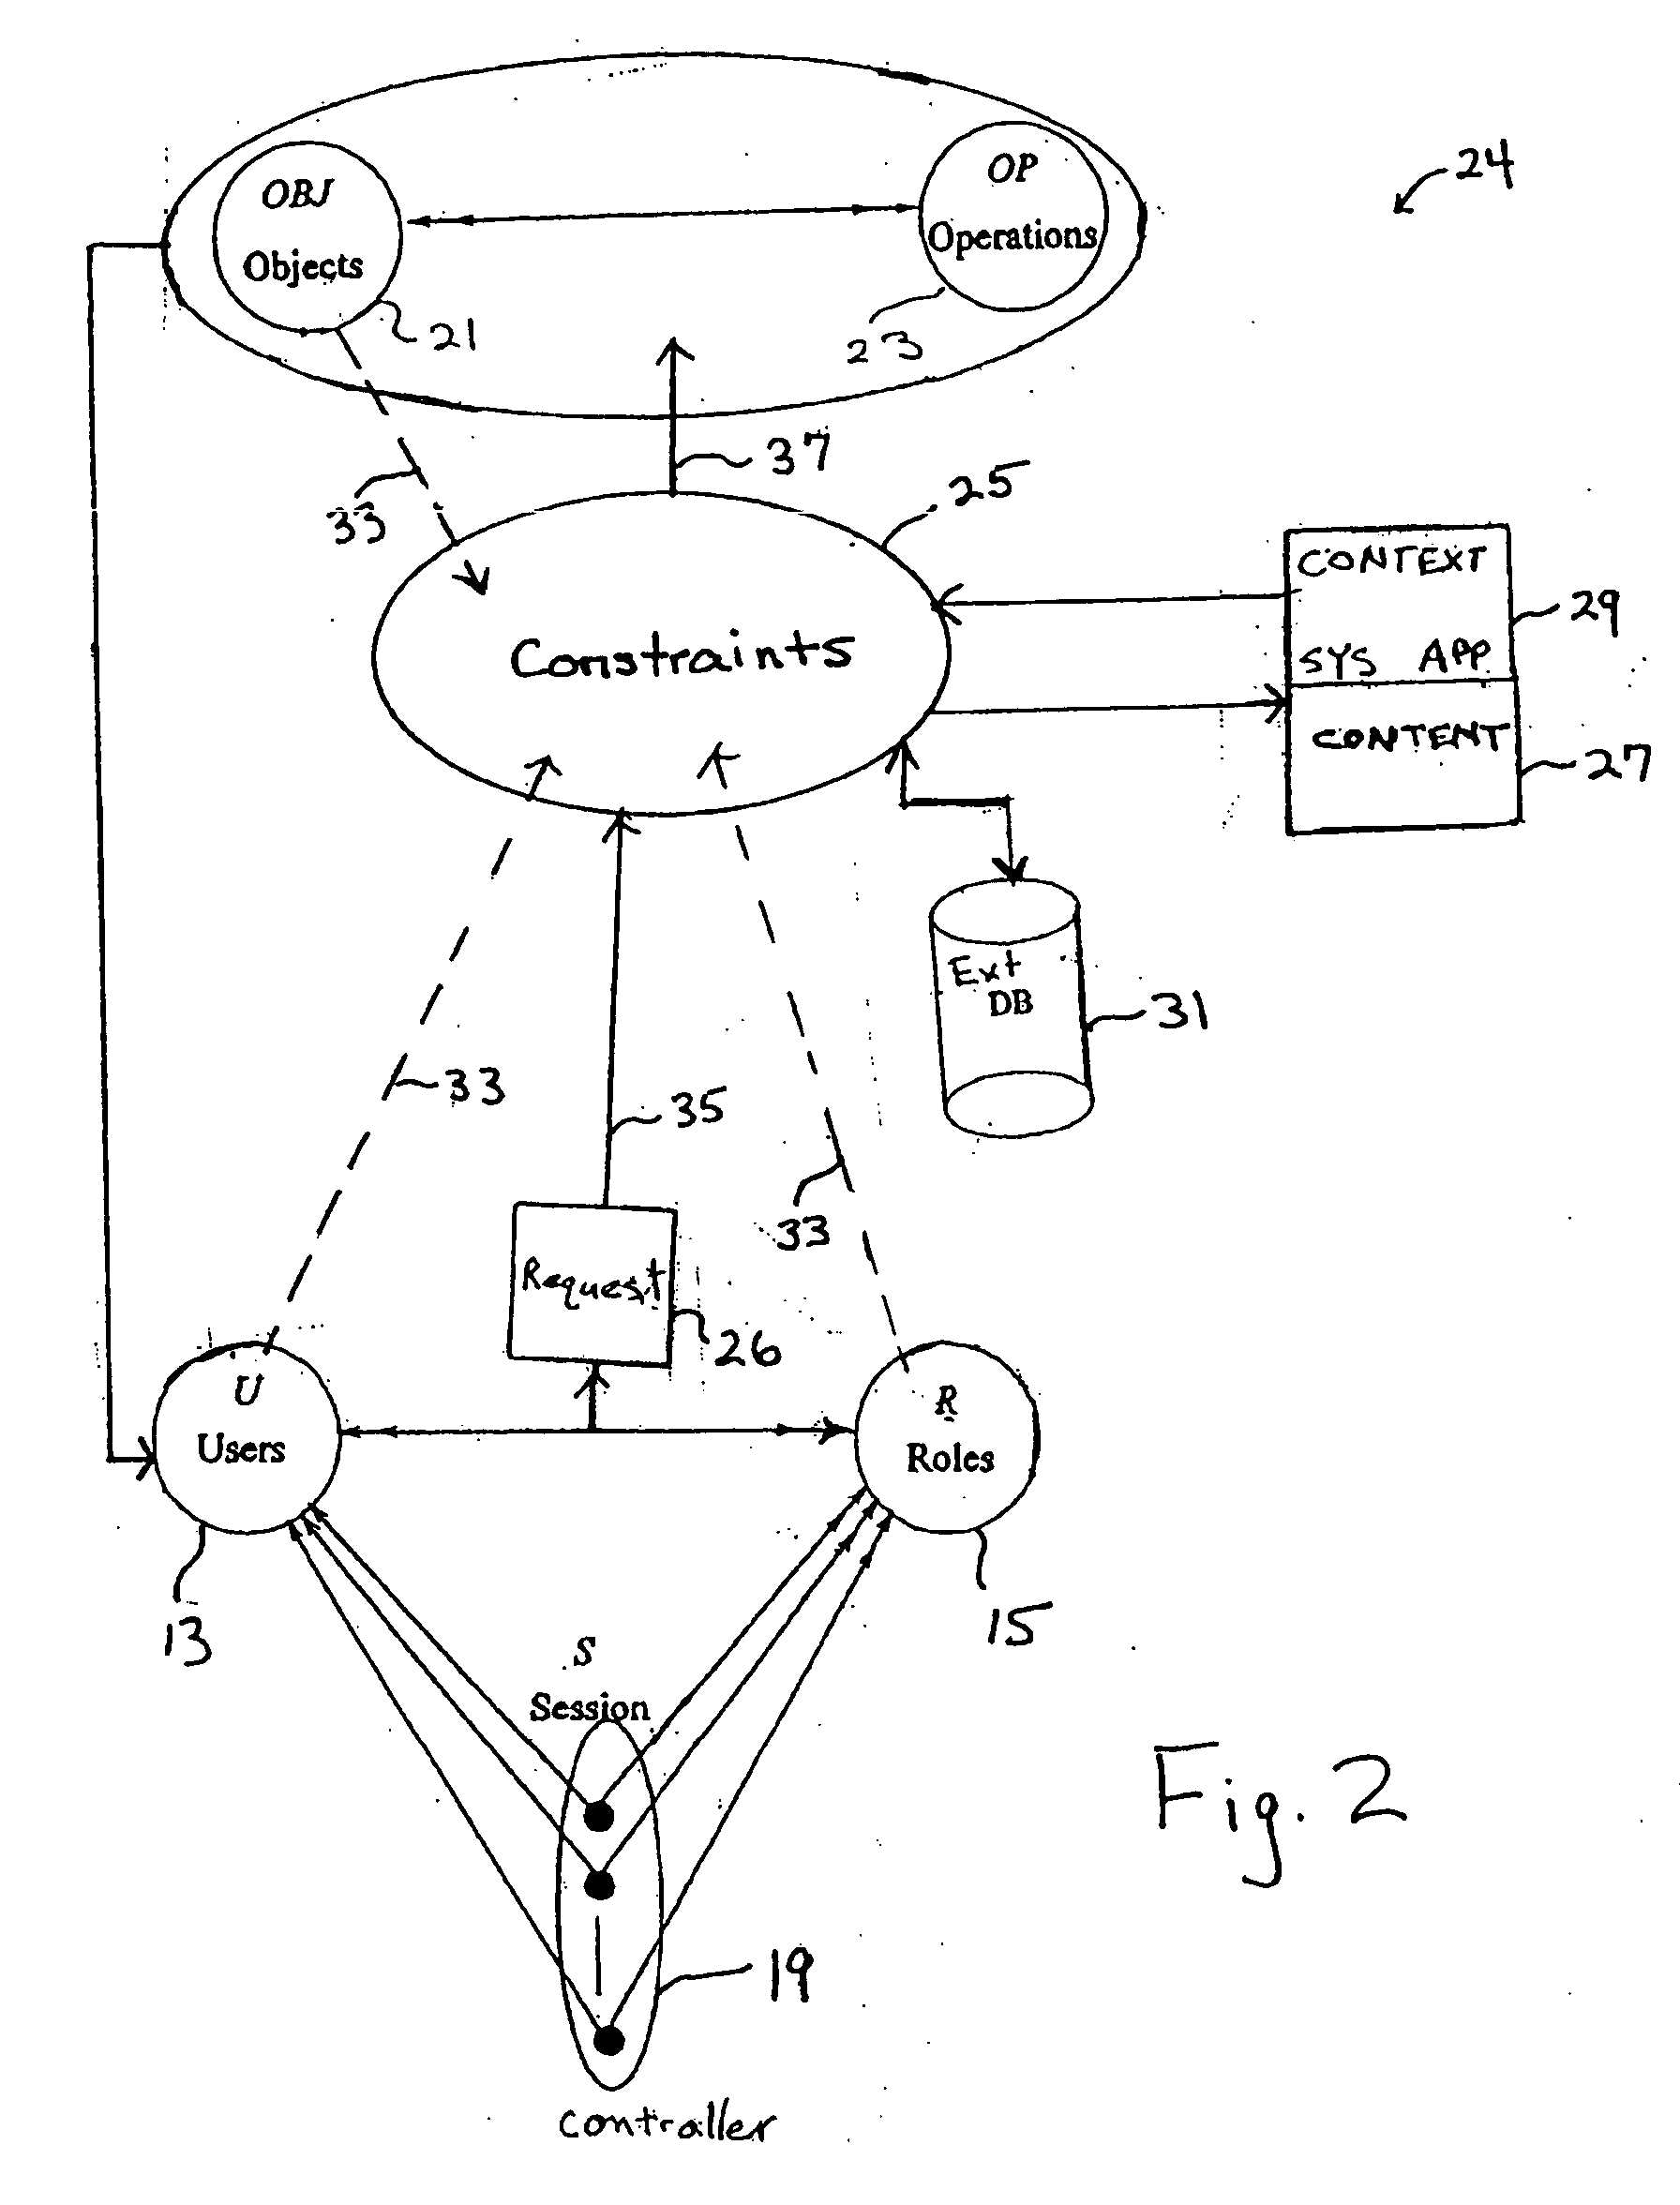 Refined permission constraints using internal and external data extraction in a role-based access control system